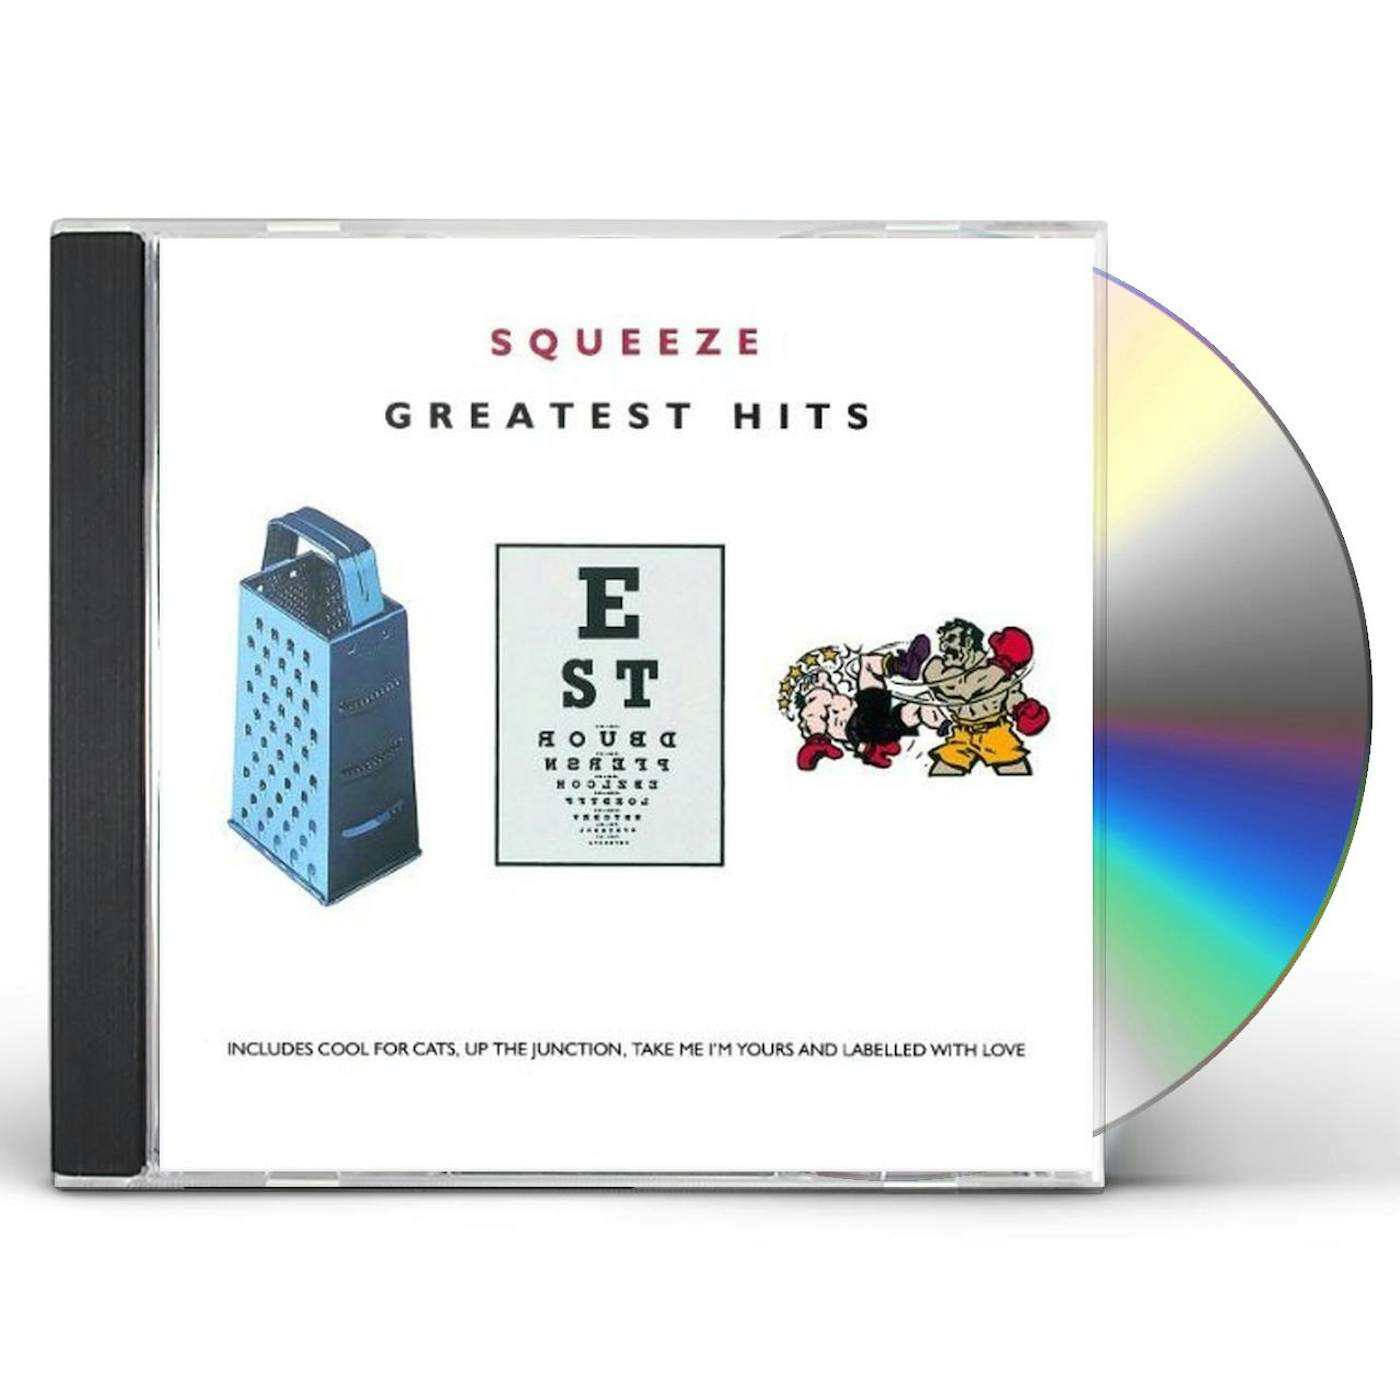 Squeeze GREATEST HITS CD